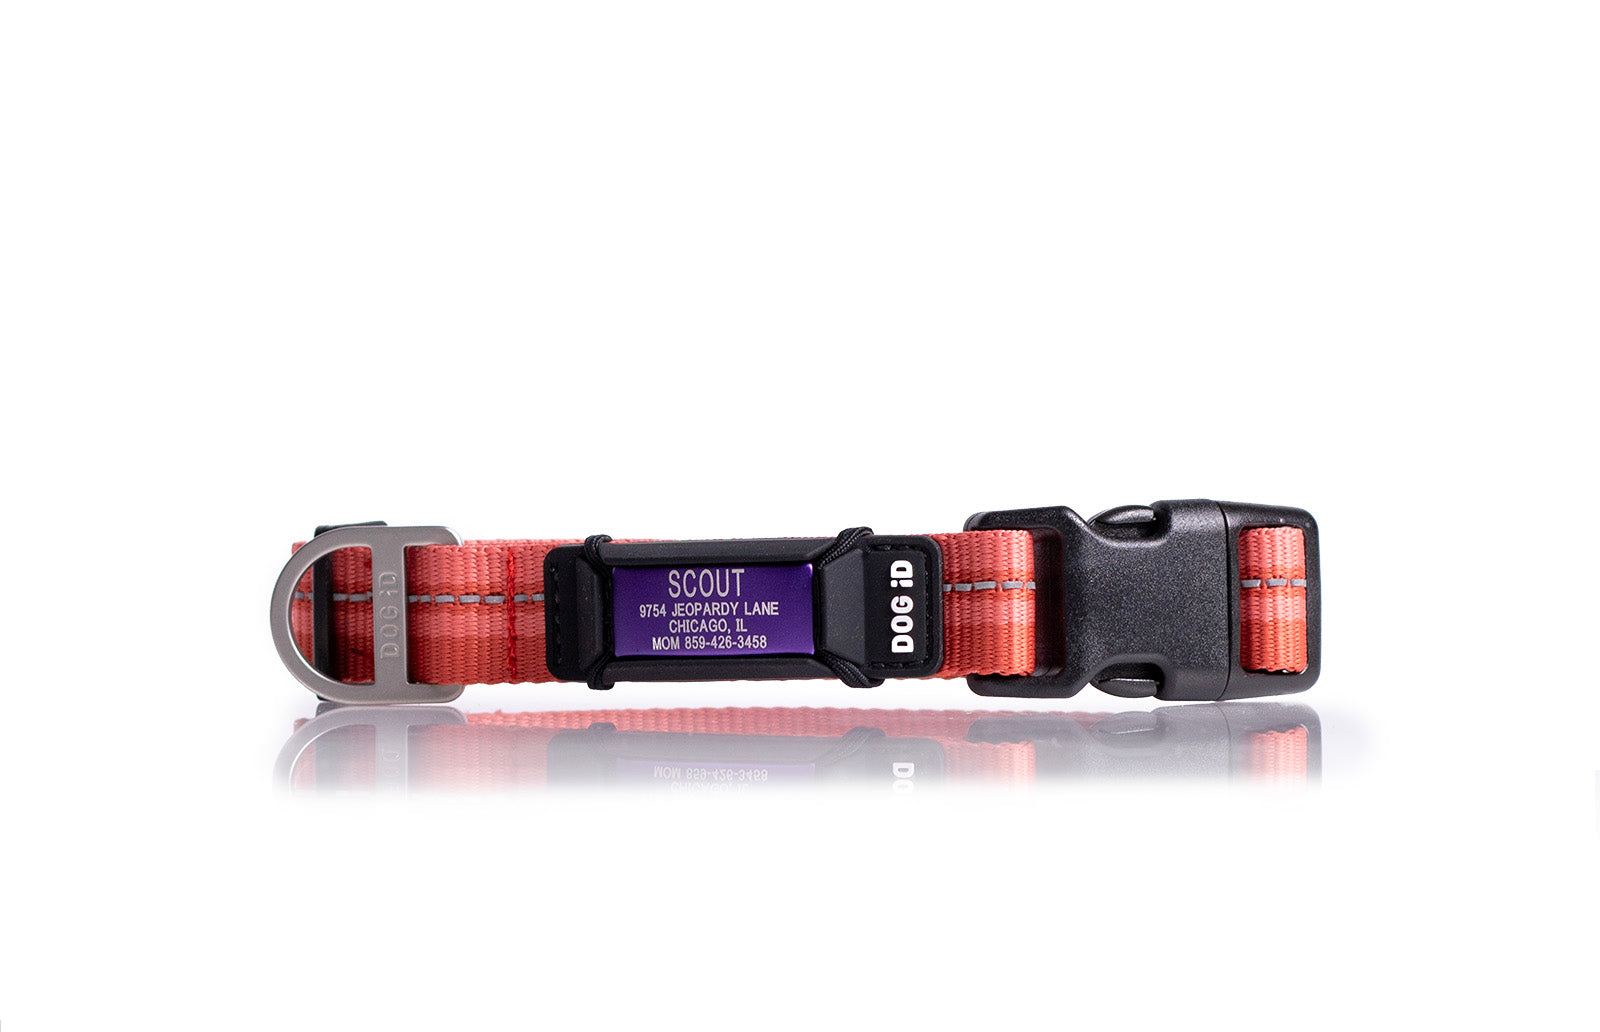 The Rock Solid Dog Collar with ID Tag | Dog iD